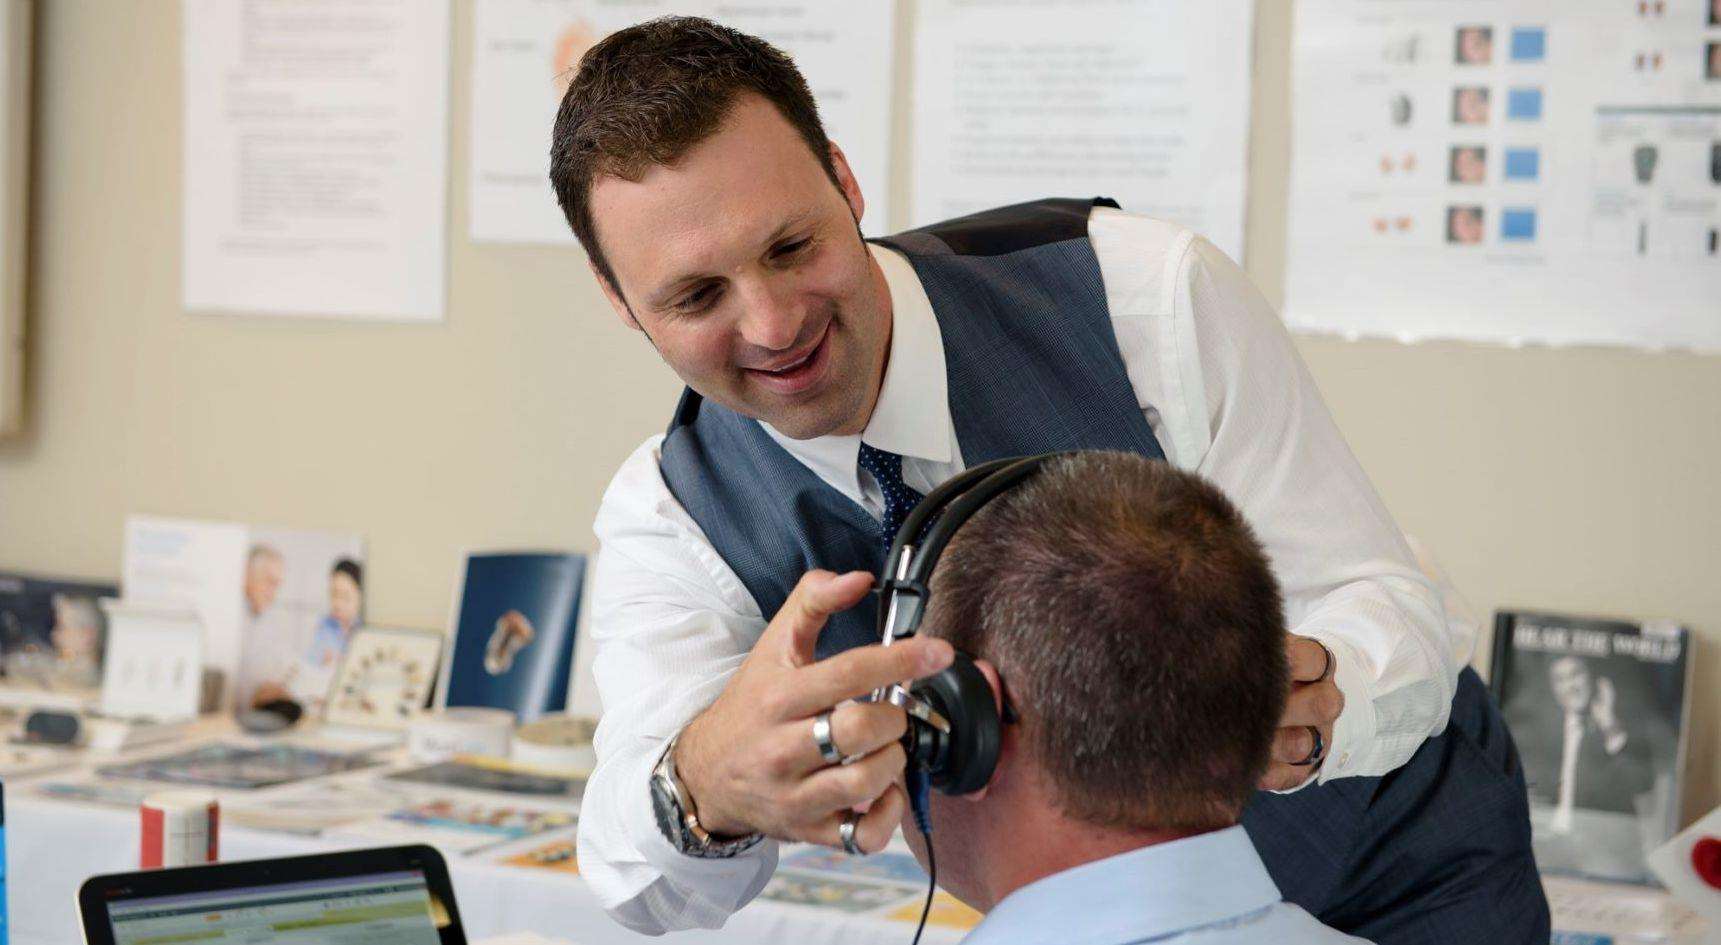 Coming through loud and clear: Audiologist Lee Fletcher checking a patient at Regain Hearing in Broadstairs